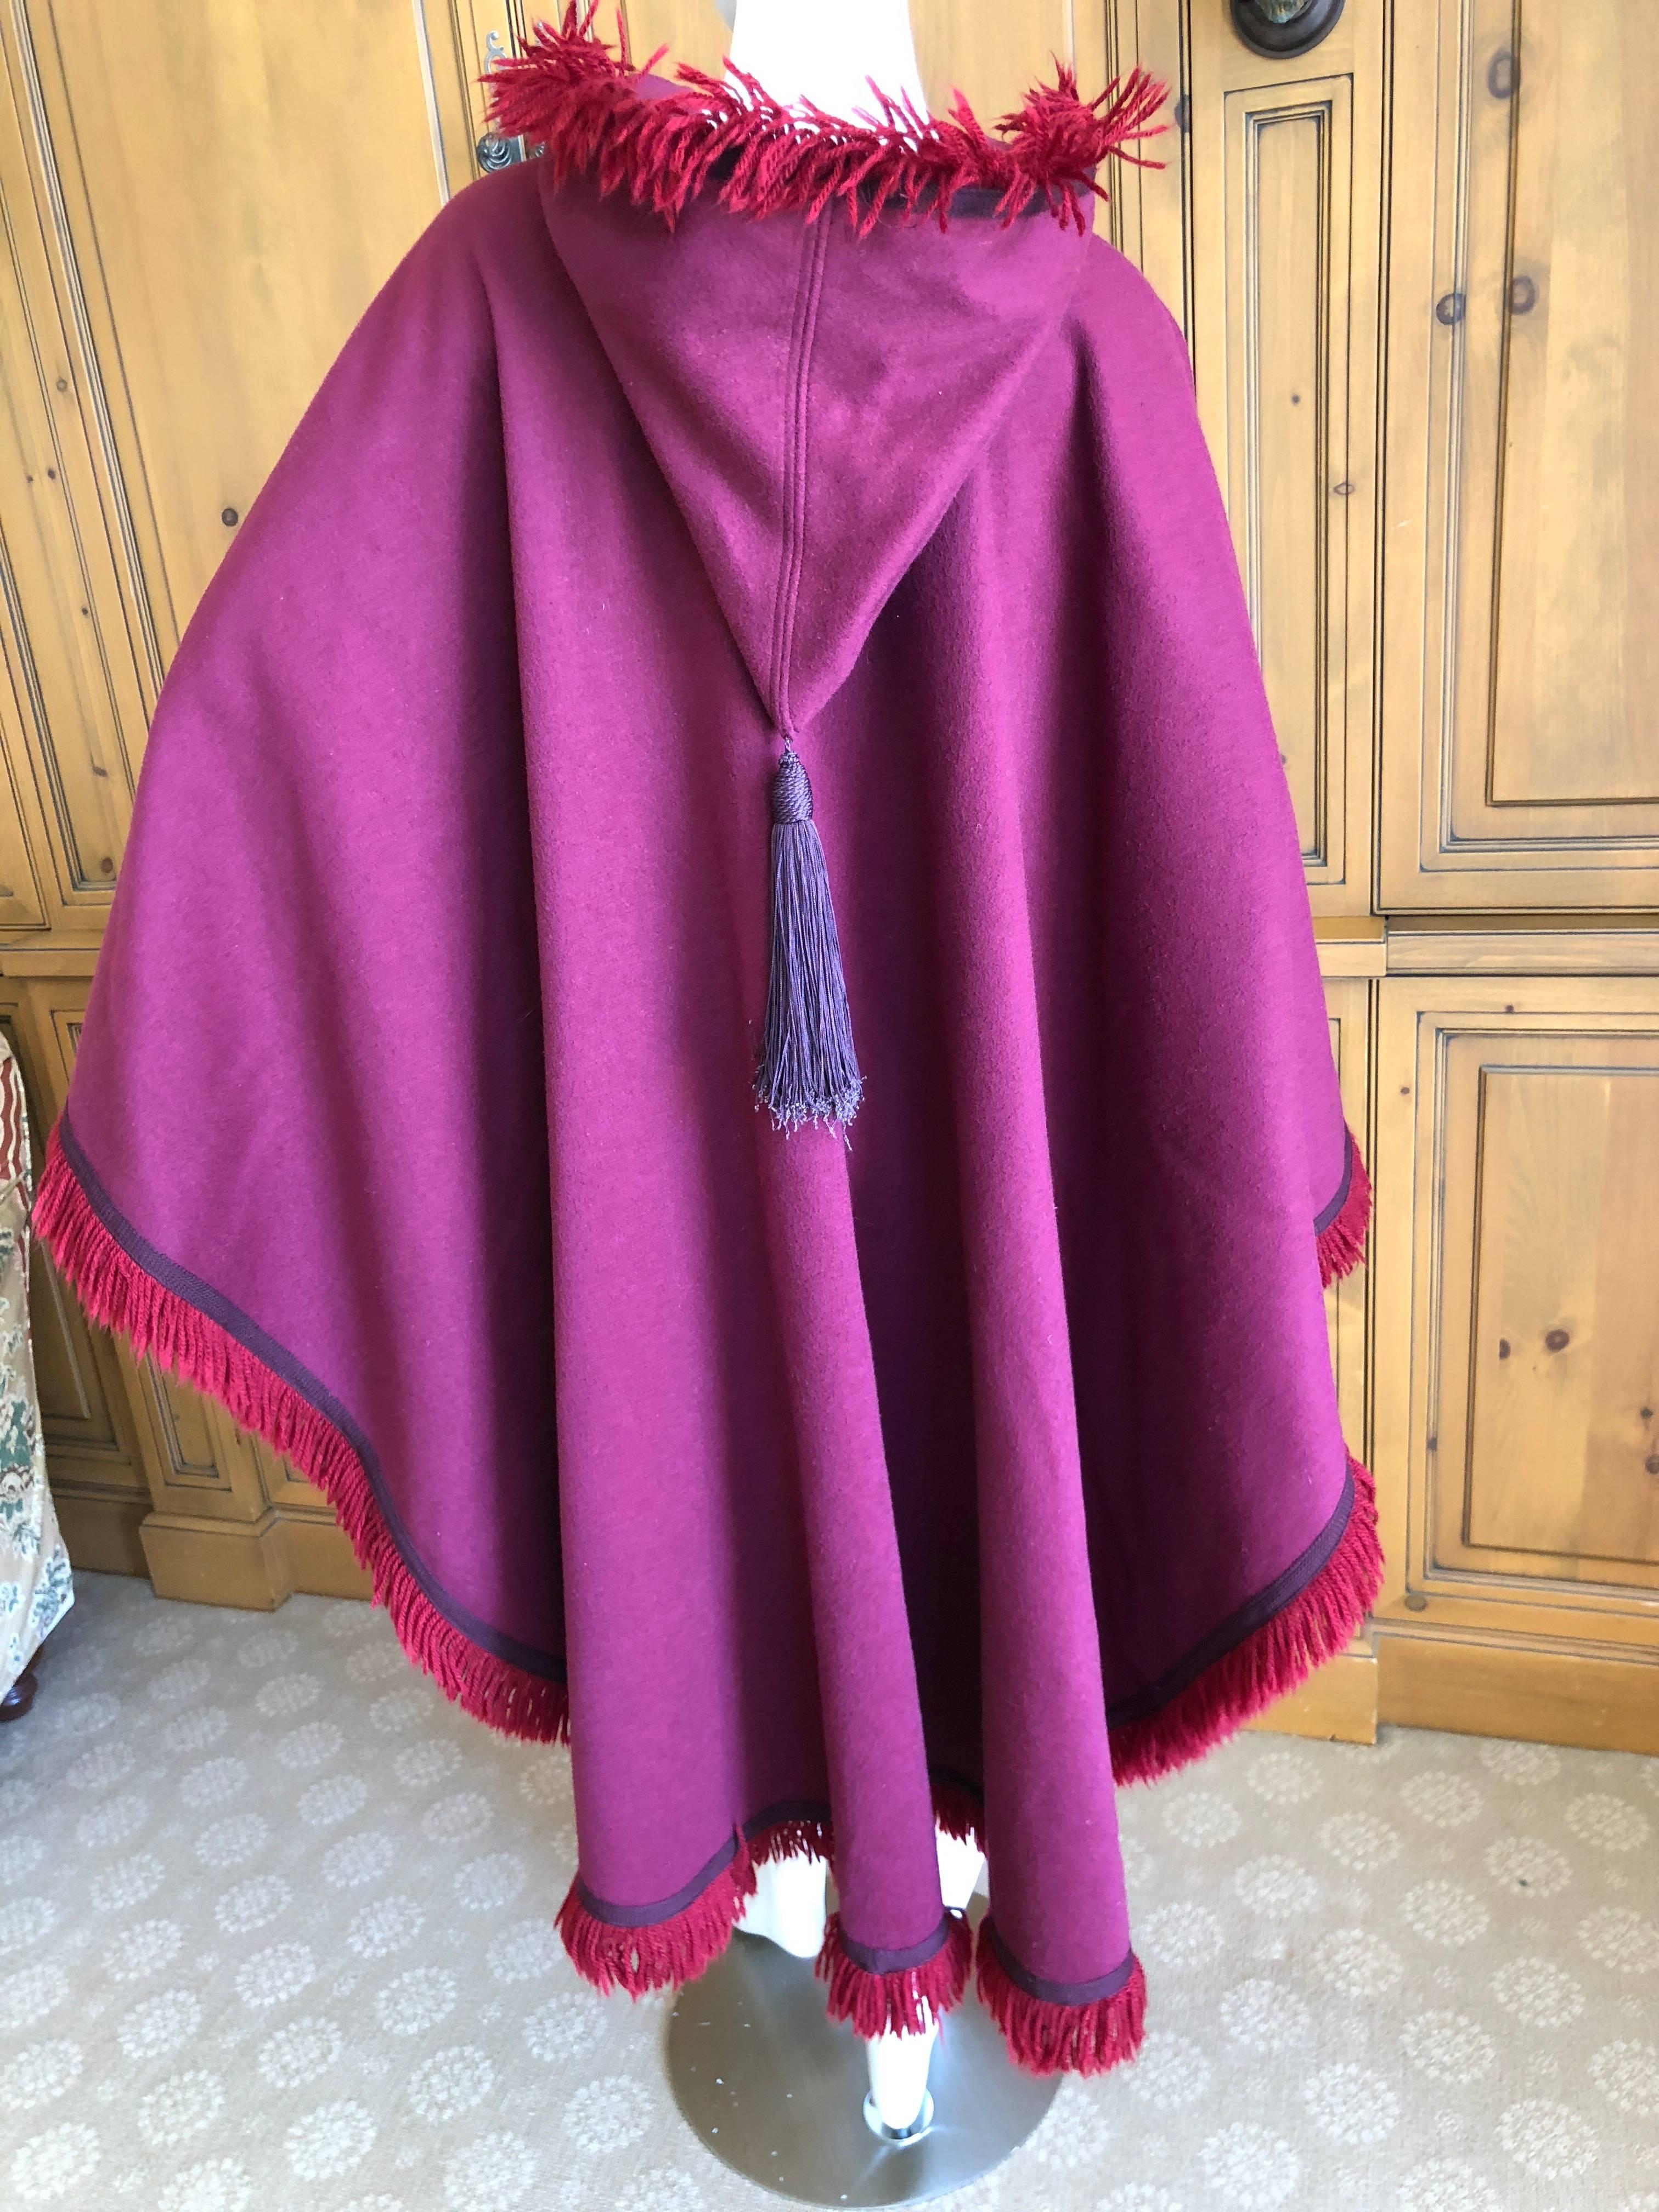 Yves Saint Laurent Rive Gauche Fringed Fuchsia Cape with Hood and Tassel For Sale 3